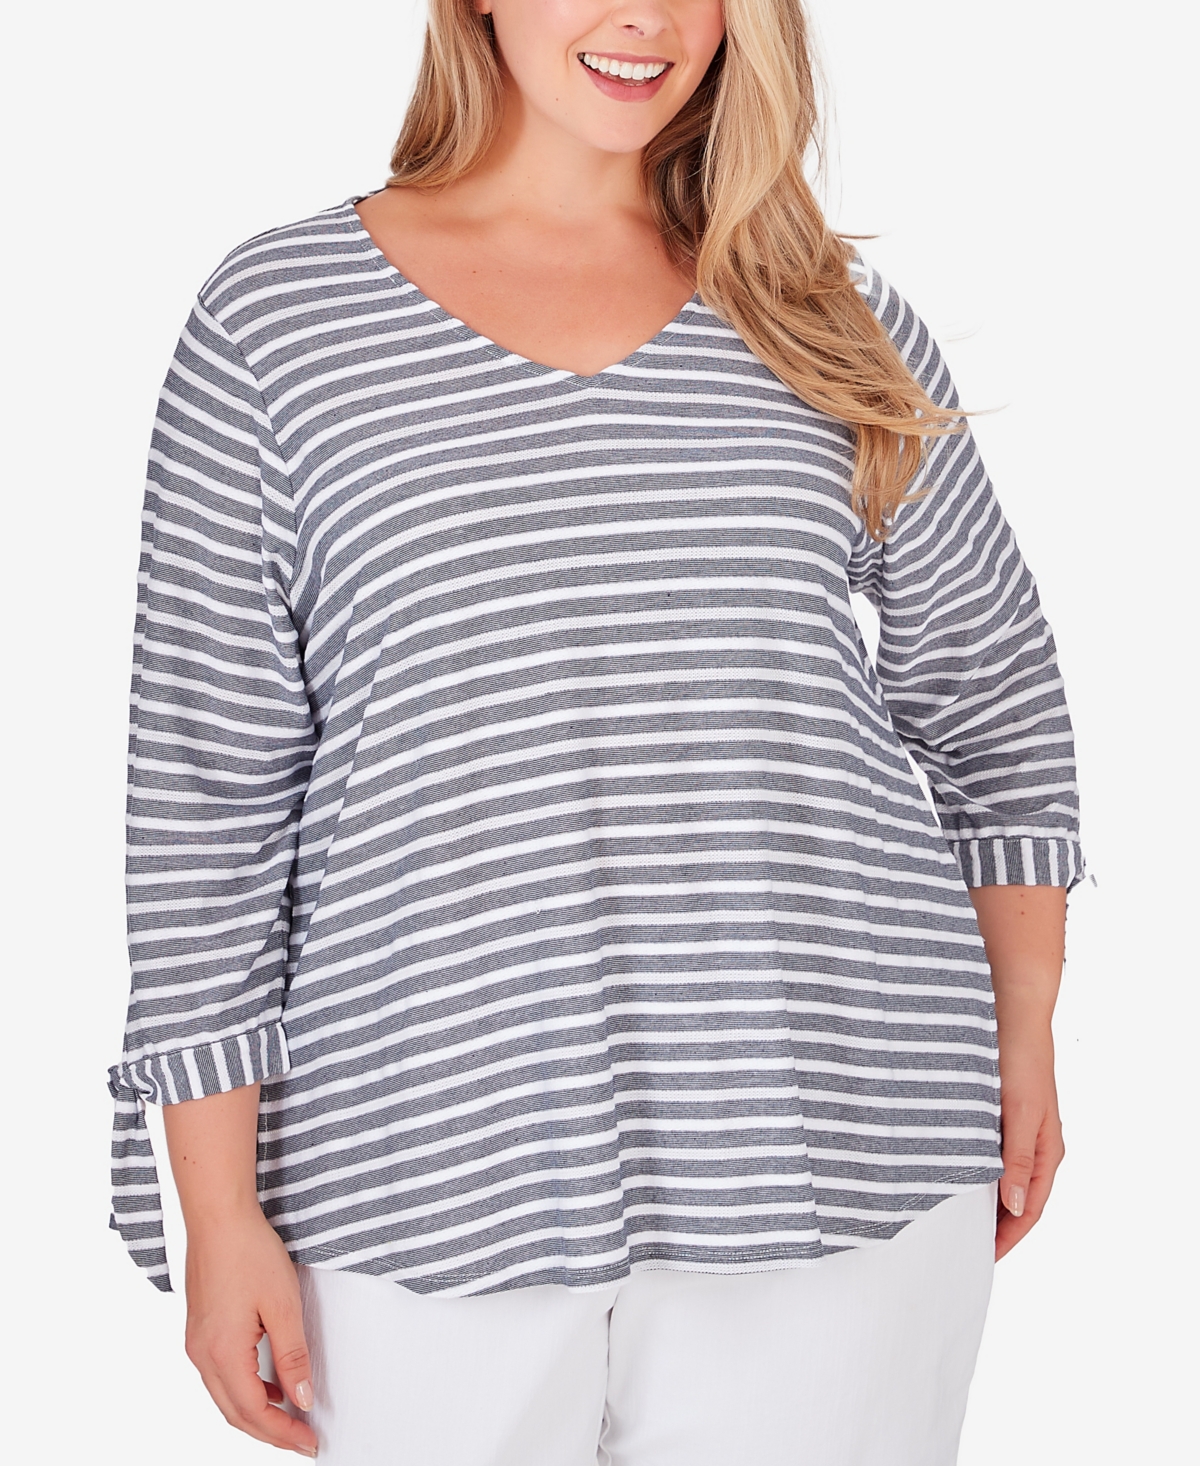 Ruby Rd. Plus Size V-neck Light Weight Stripe Knit Top With Tie Sleeve Detail In Navy,white